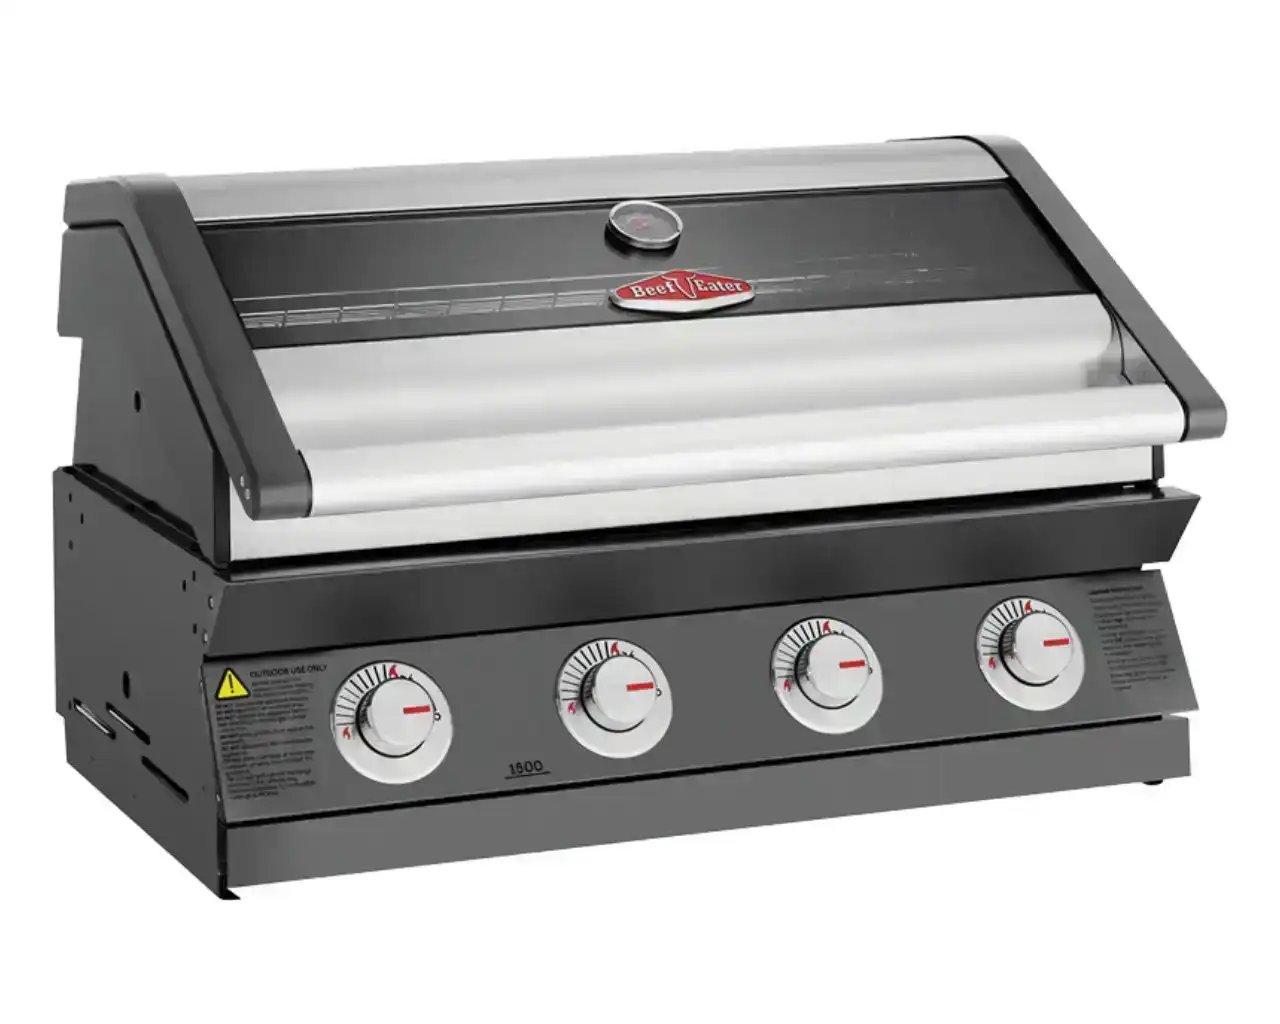 Beefeater 1600 Series 4 Burner Build In BBQ